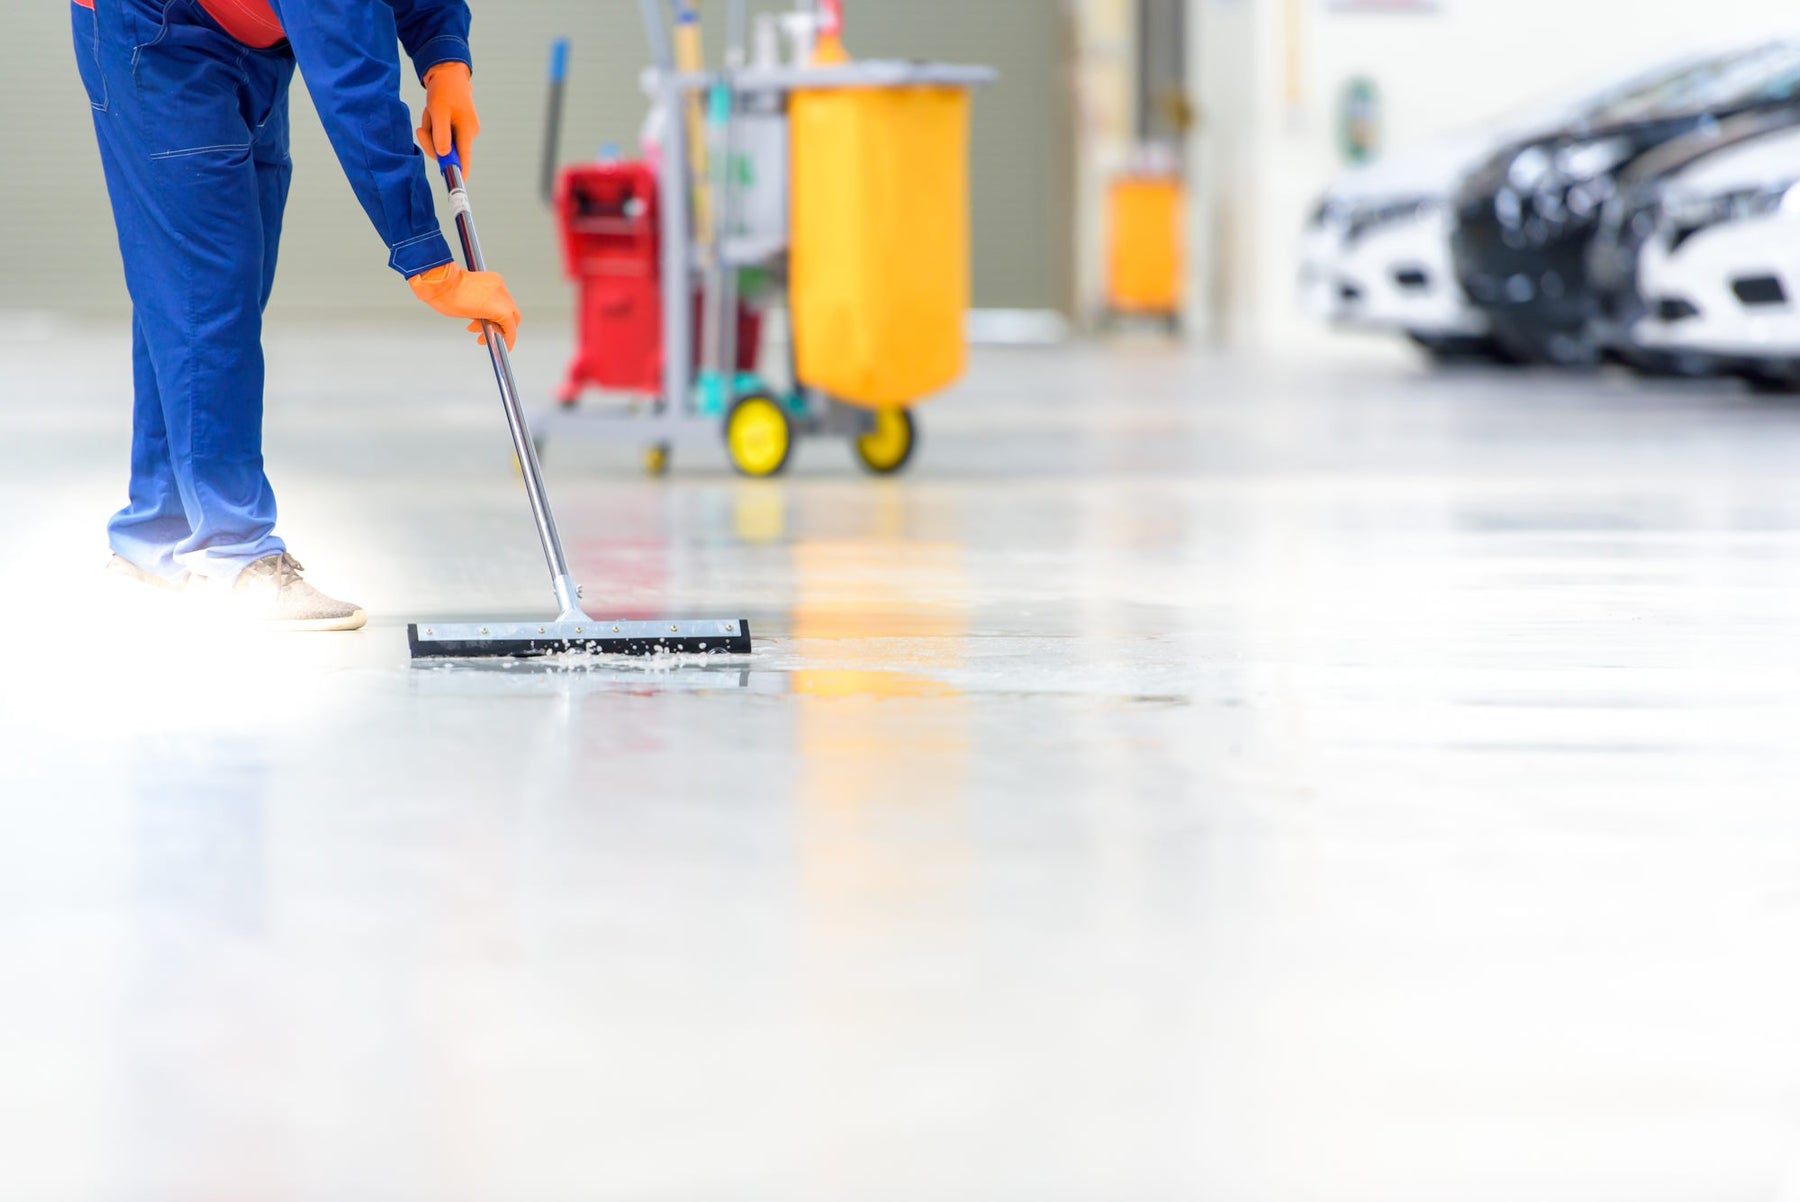 Cleaning Services Tender for National Food Manufacturer - $55k Savings p.a.